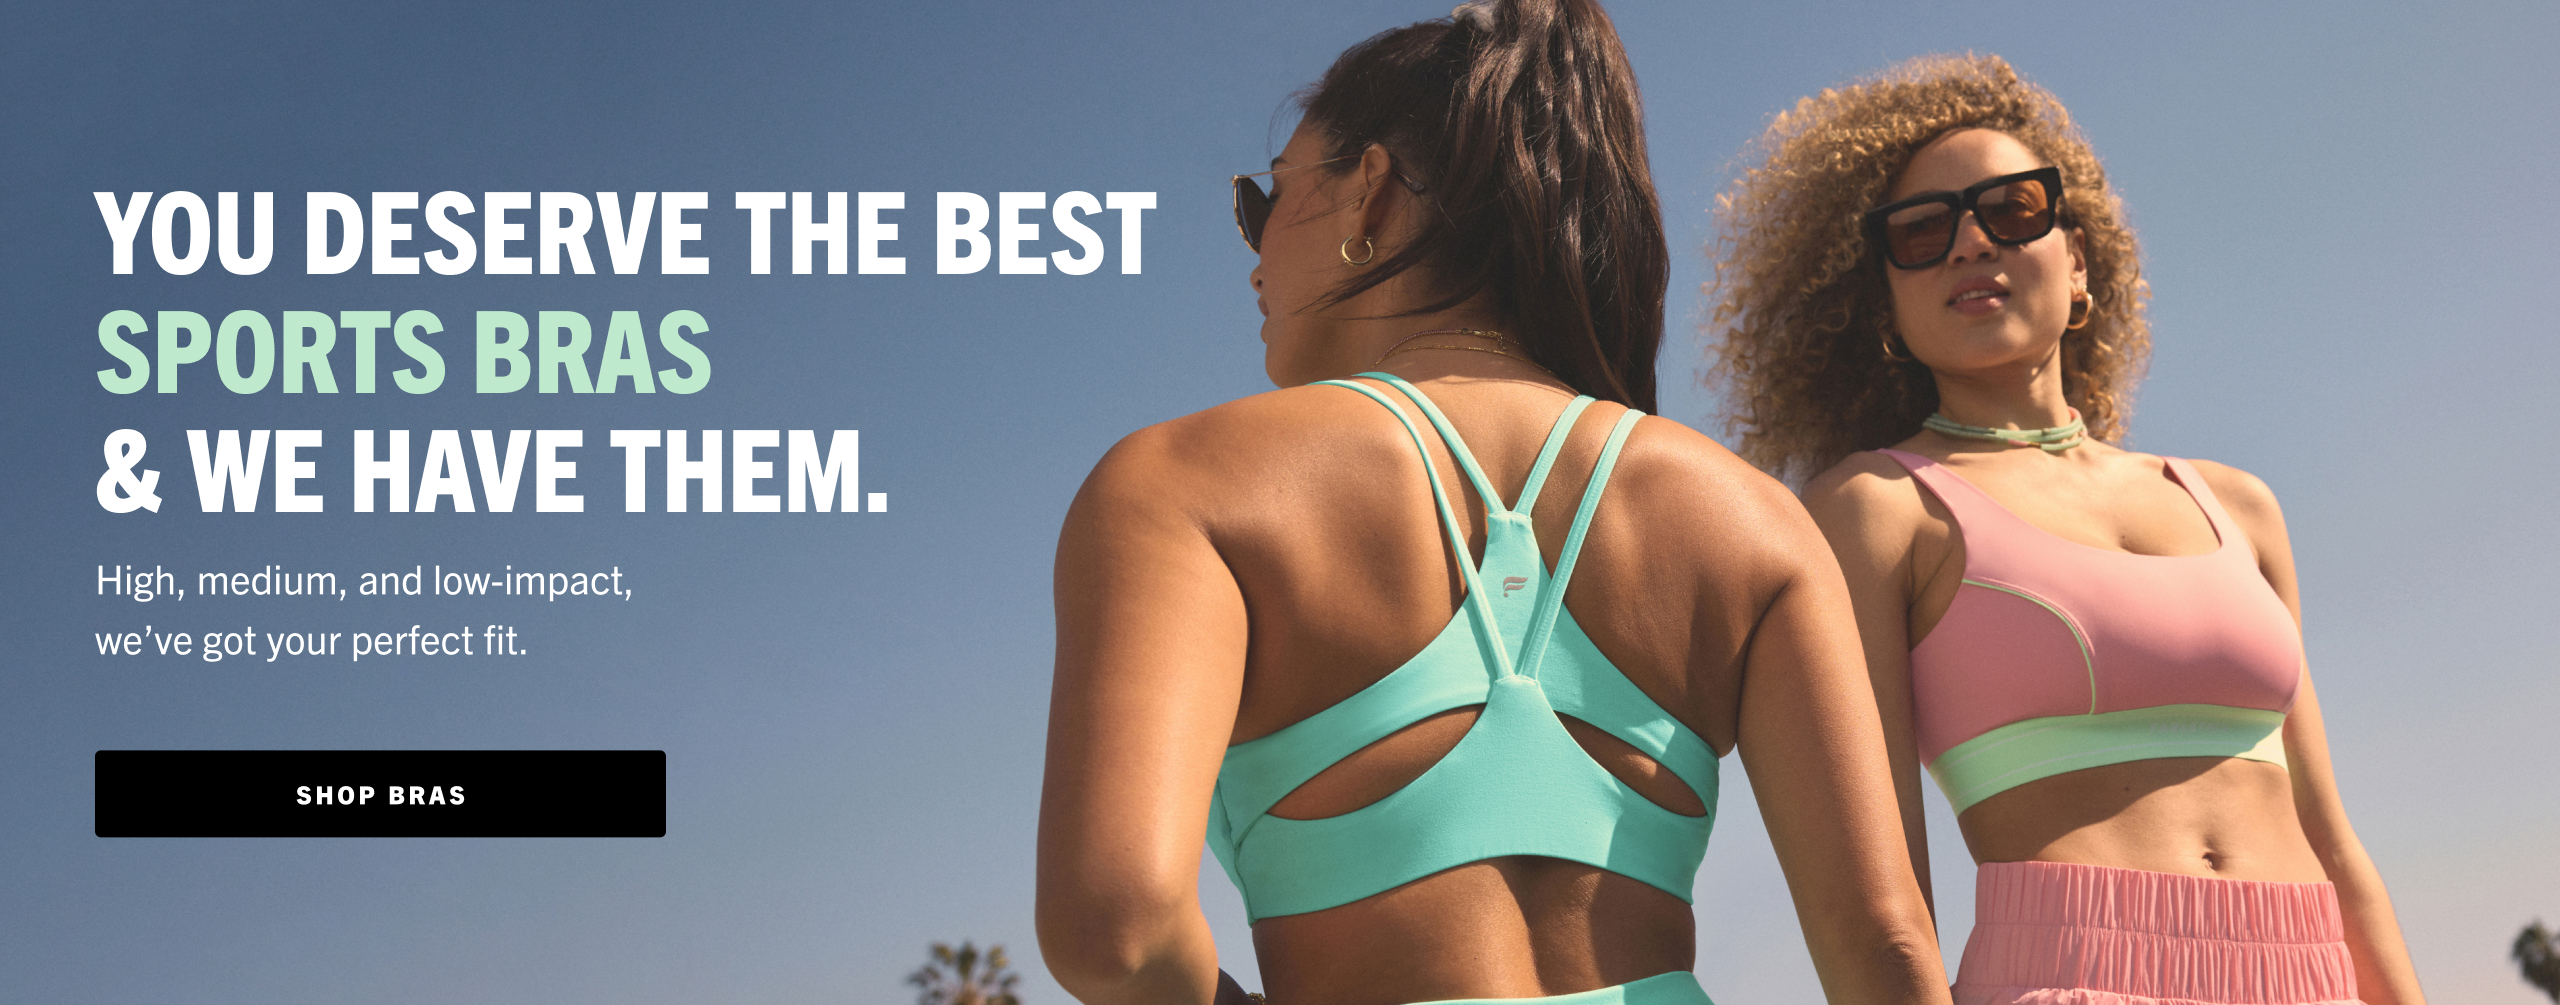 You deserve the best sports bras and we have them. high, medium, and low-impact, we've got your perfect fit. take the style quiz to shop.